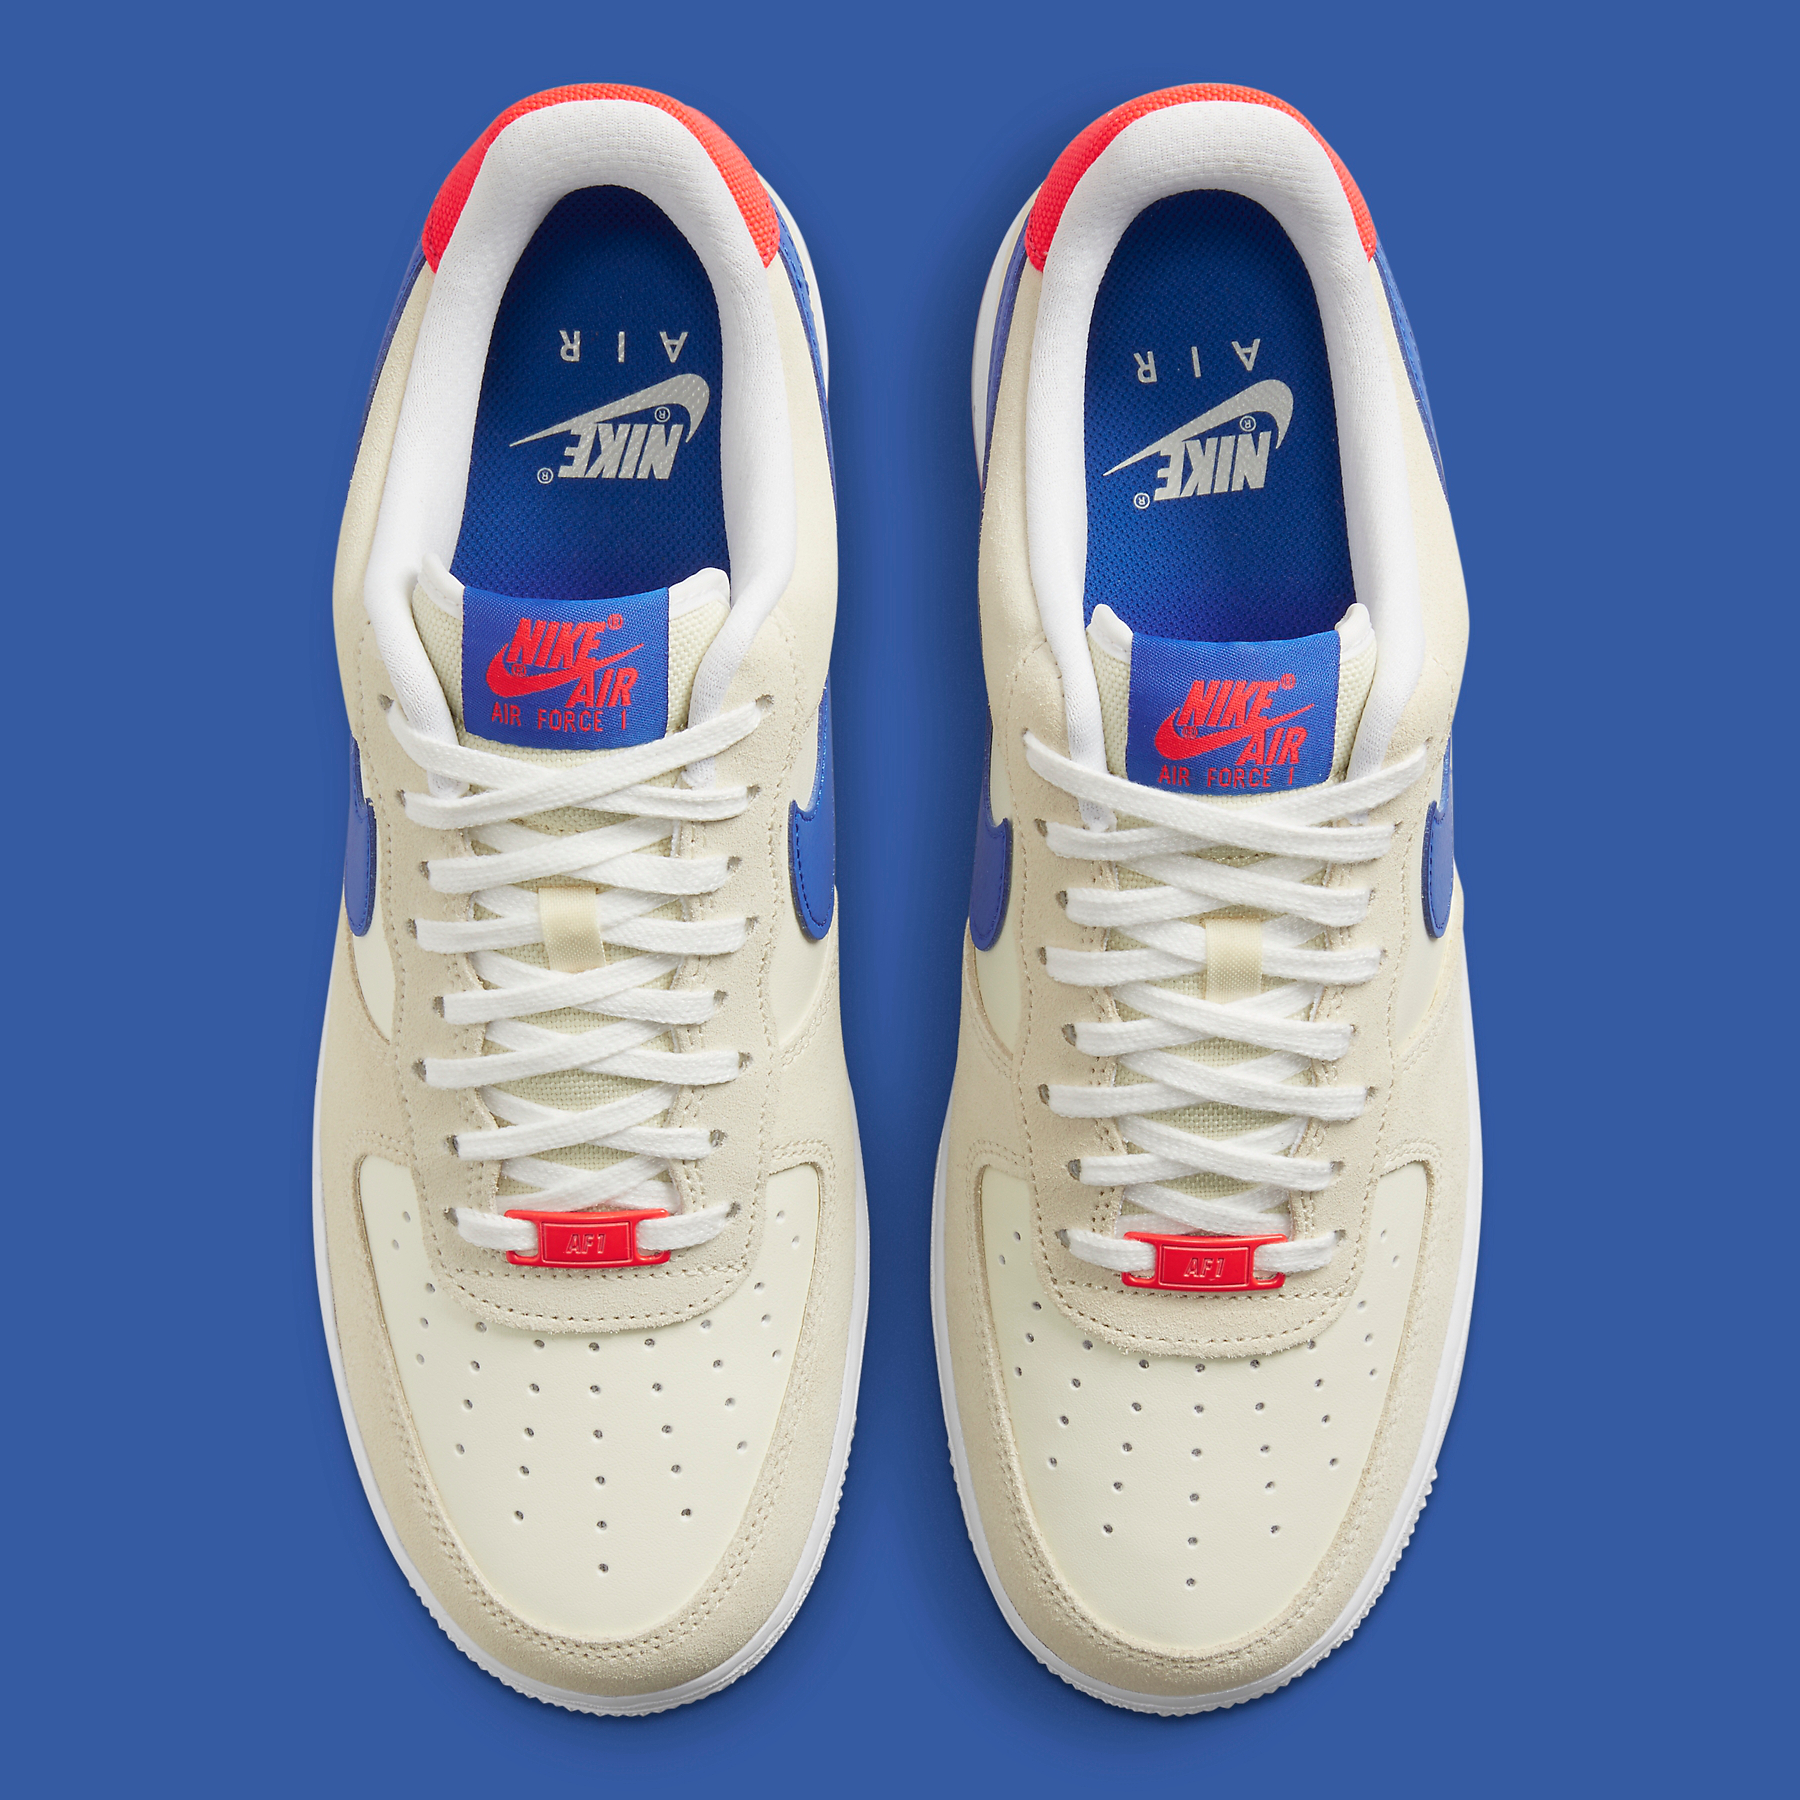 red and blue white air forces